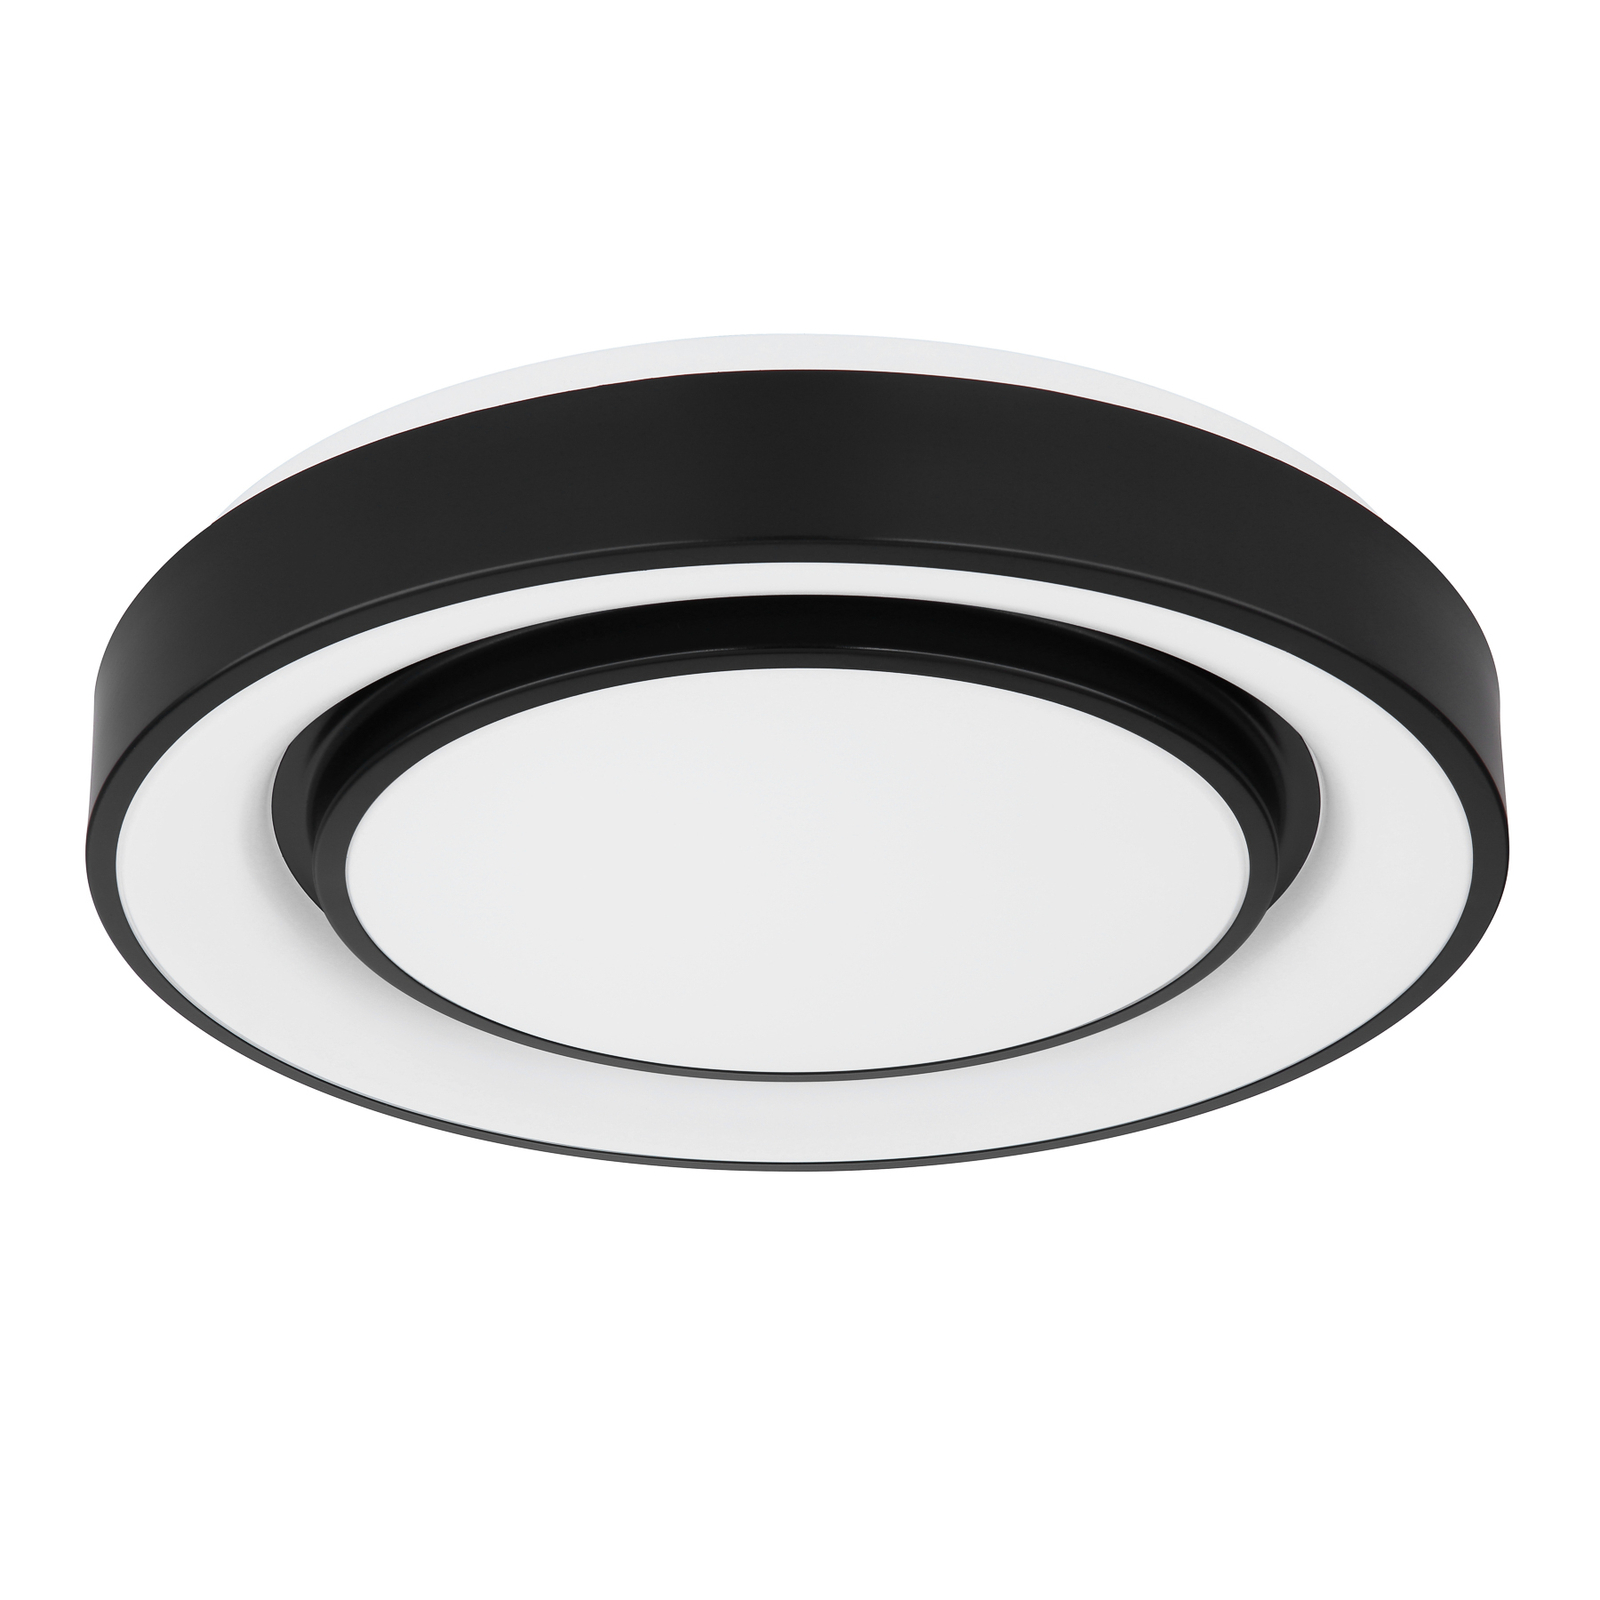 Sully LED ceiling light RGBW remote control black